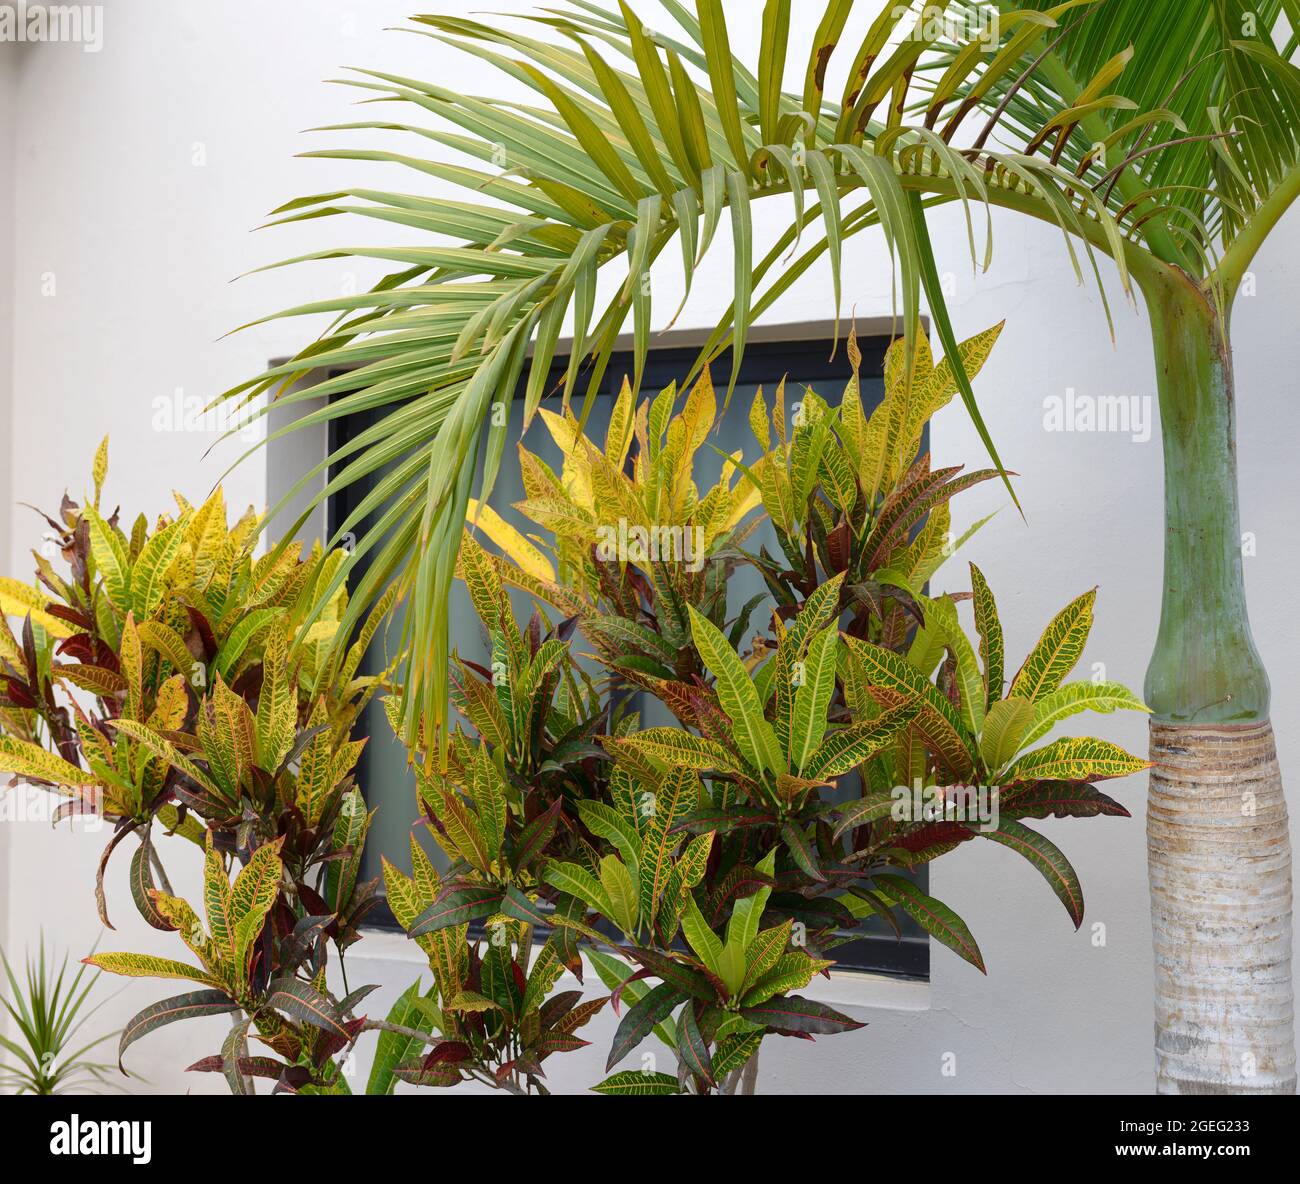 Close-up decorative tropical plants garden croton and palm tree on white wall of building corner background. Stock Photo